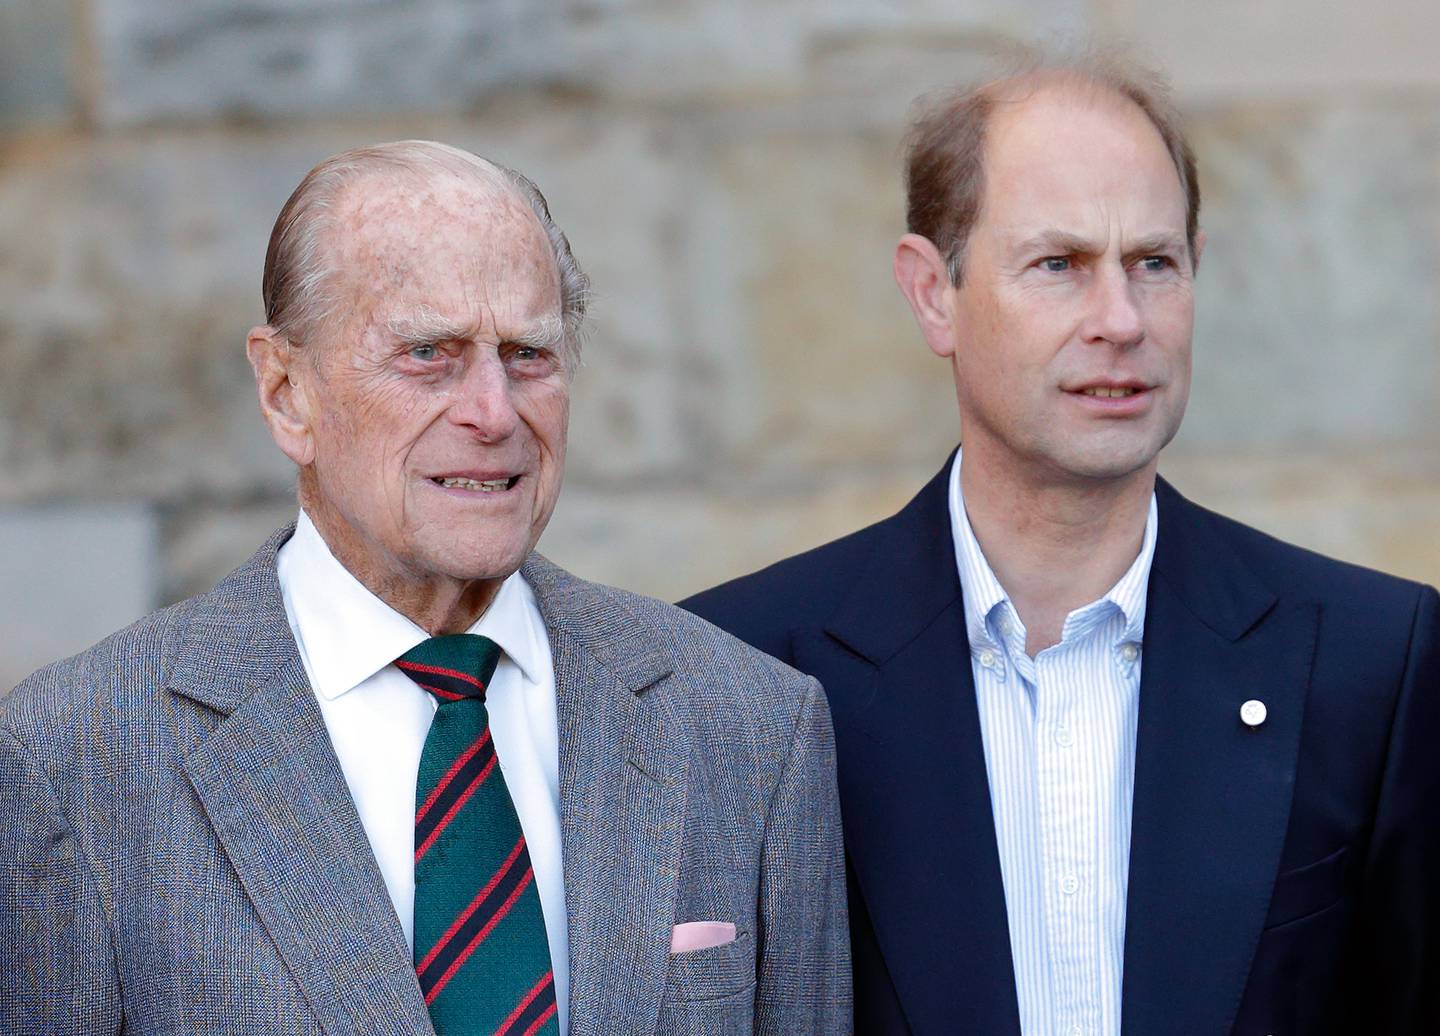 Prince Edward is now the Duke of Edinburgh, taking over the title from his late father, Prince Philip.  Photo / Getty Images